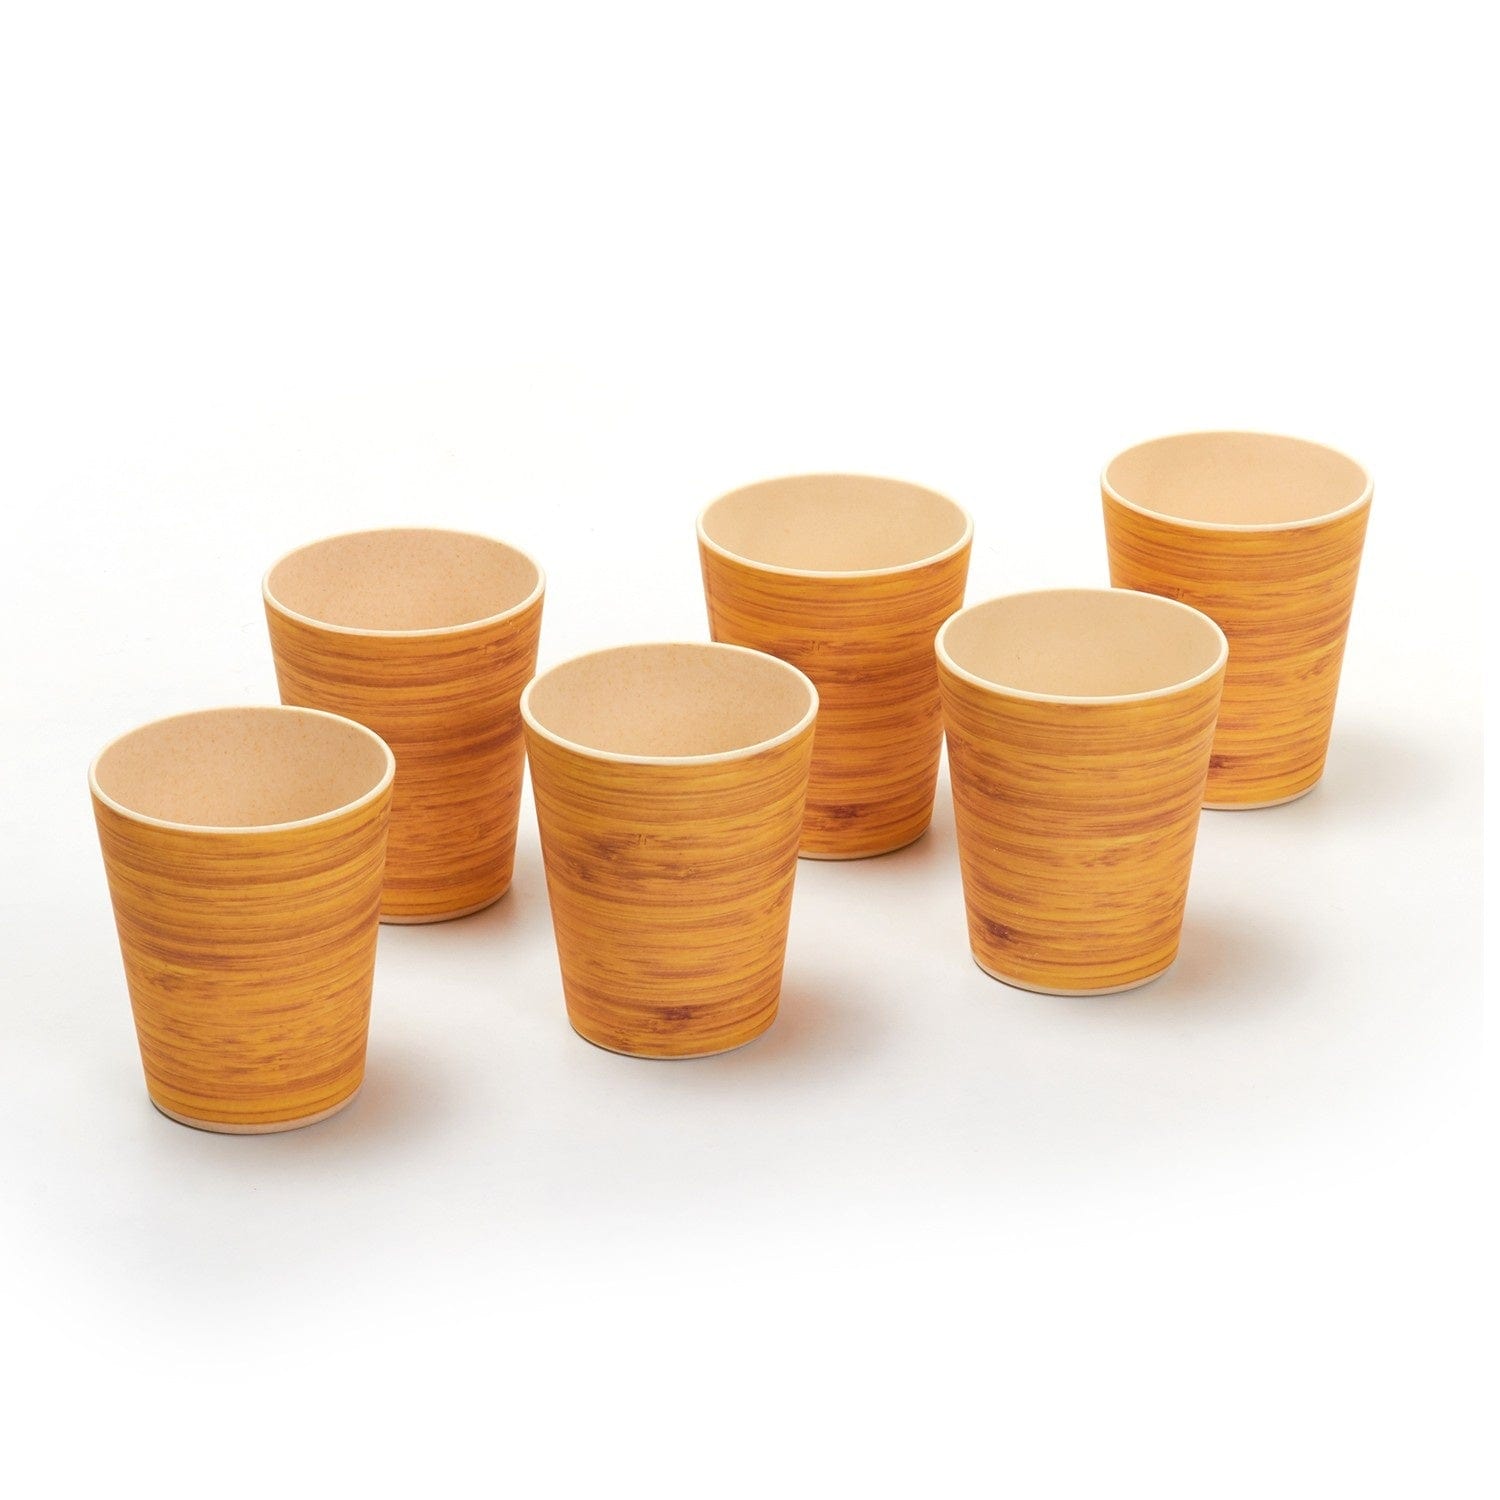 Red Butler Tumblers Bamboo Fibre Tumblers 380ml | 6pcs Set | Wooden Design BG38A4 Daily-Use Eco-Friendly Bamboo Fiber Tumbler: Stylish & Sustainable Redbutler